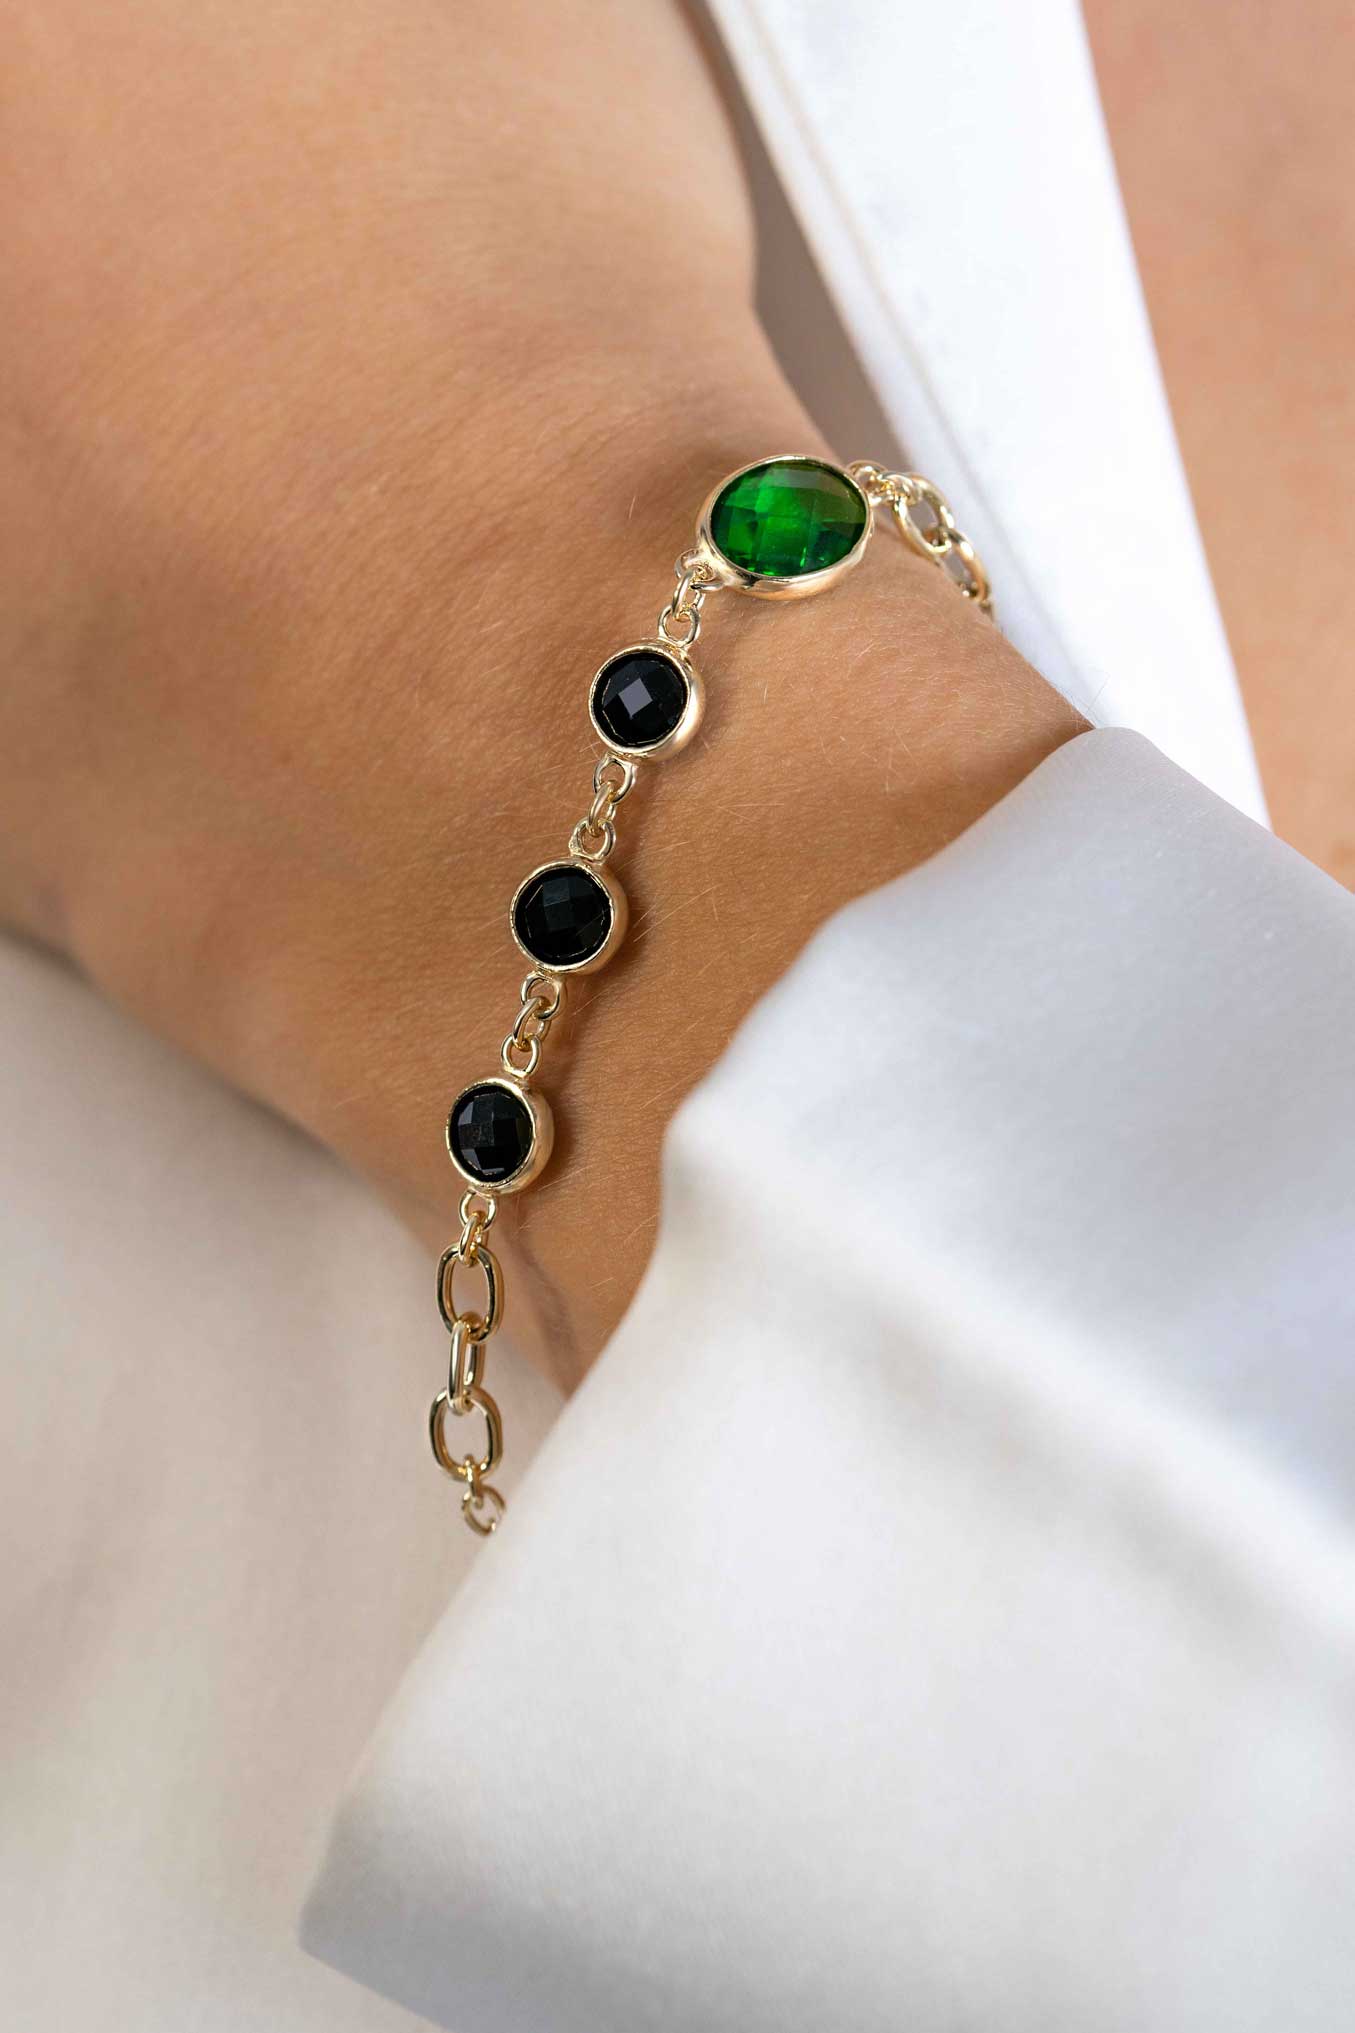 ZINZI Gold Plated Sterling Silver Chain Bracelet with 3 Round Settings with Black Stone and 1 Oval Setting with Green Stone 17-20 cm ZIA2389